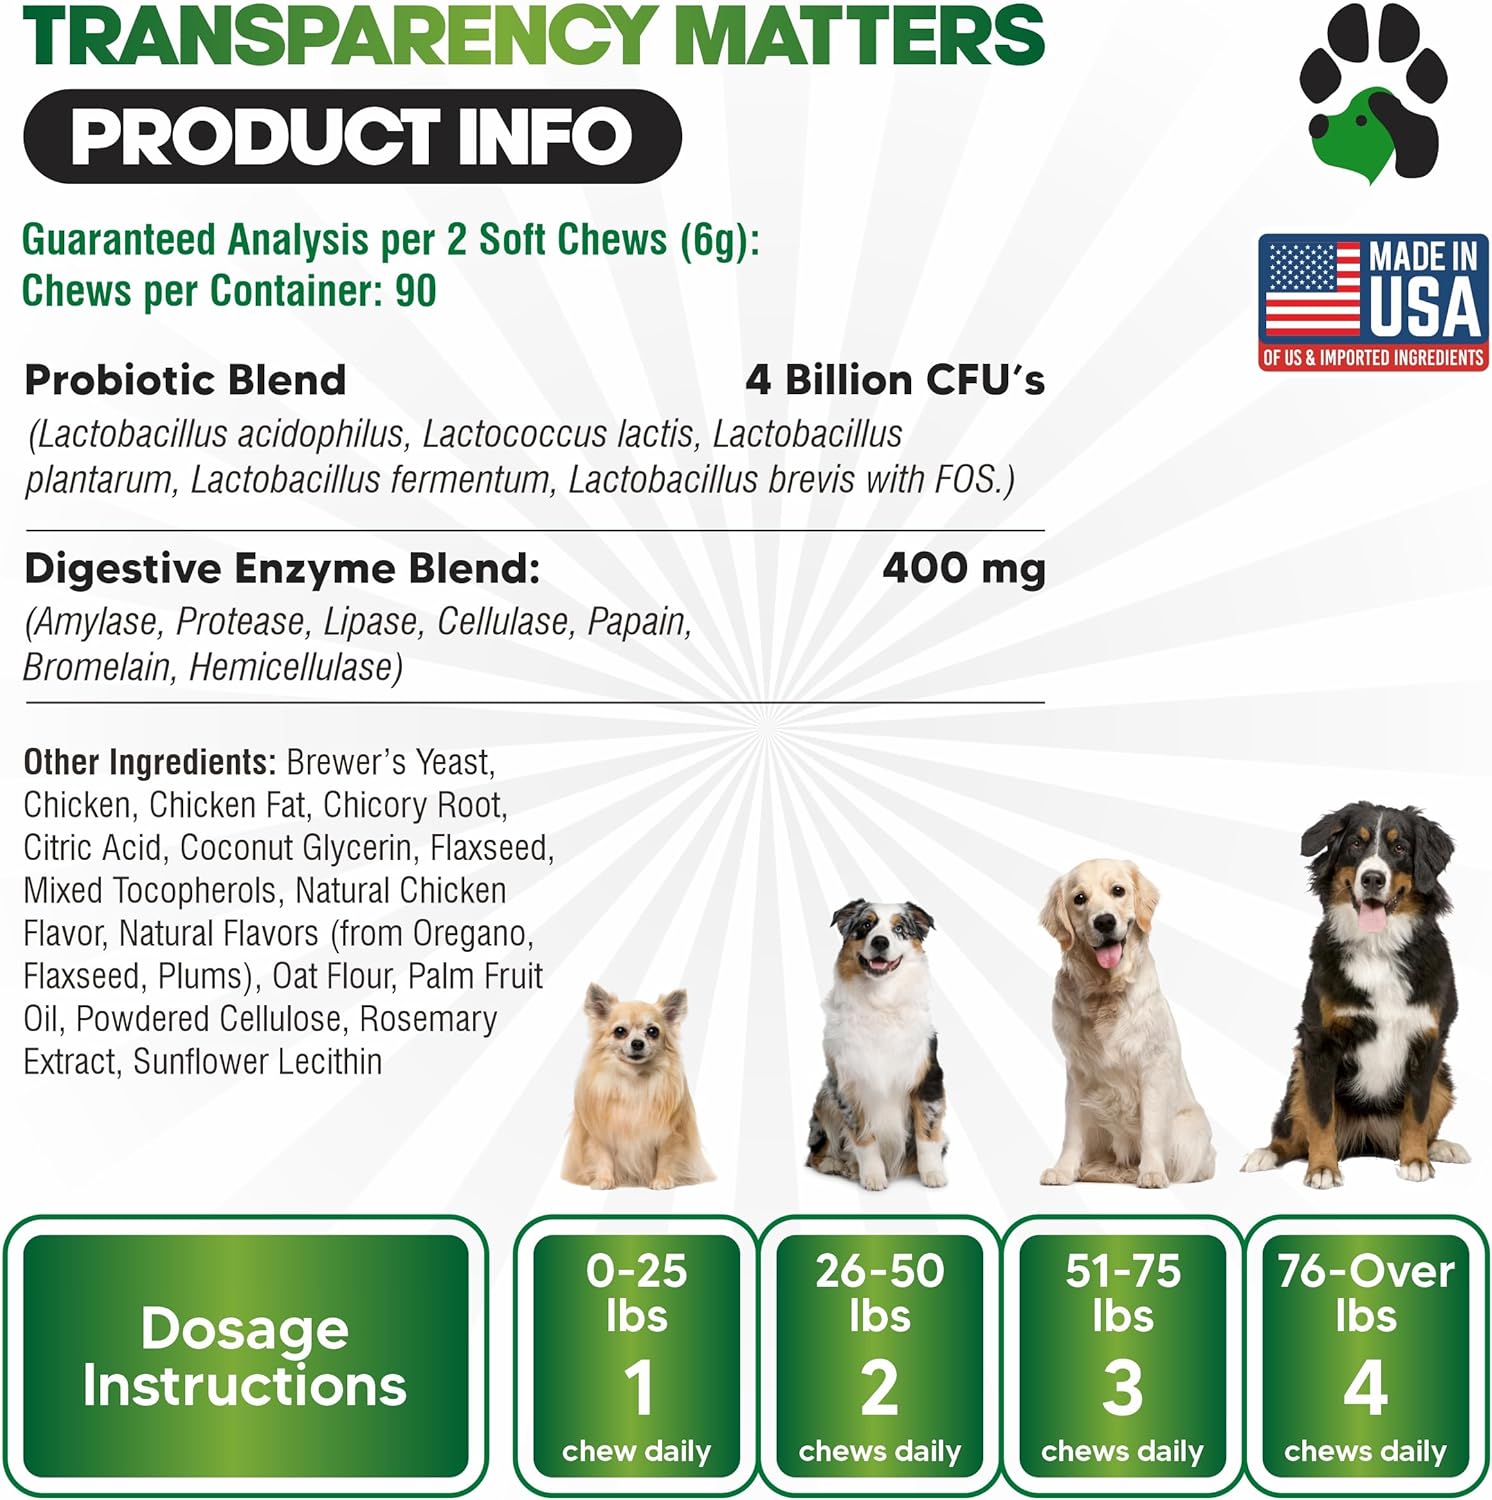 Probiotics for Dogs All Ages - Dog Probiotics for Digestive Health - Digestive Enzymes for Gut Flora, Diarrhea & Bowel Support - Gut Health Support Prebiotics for Dogs - 90 Probiotic Chews for Dogs